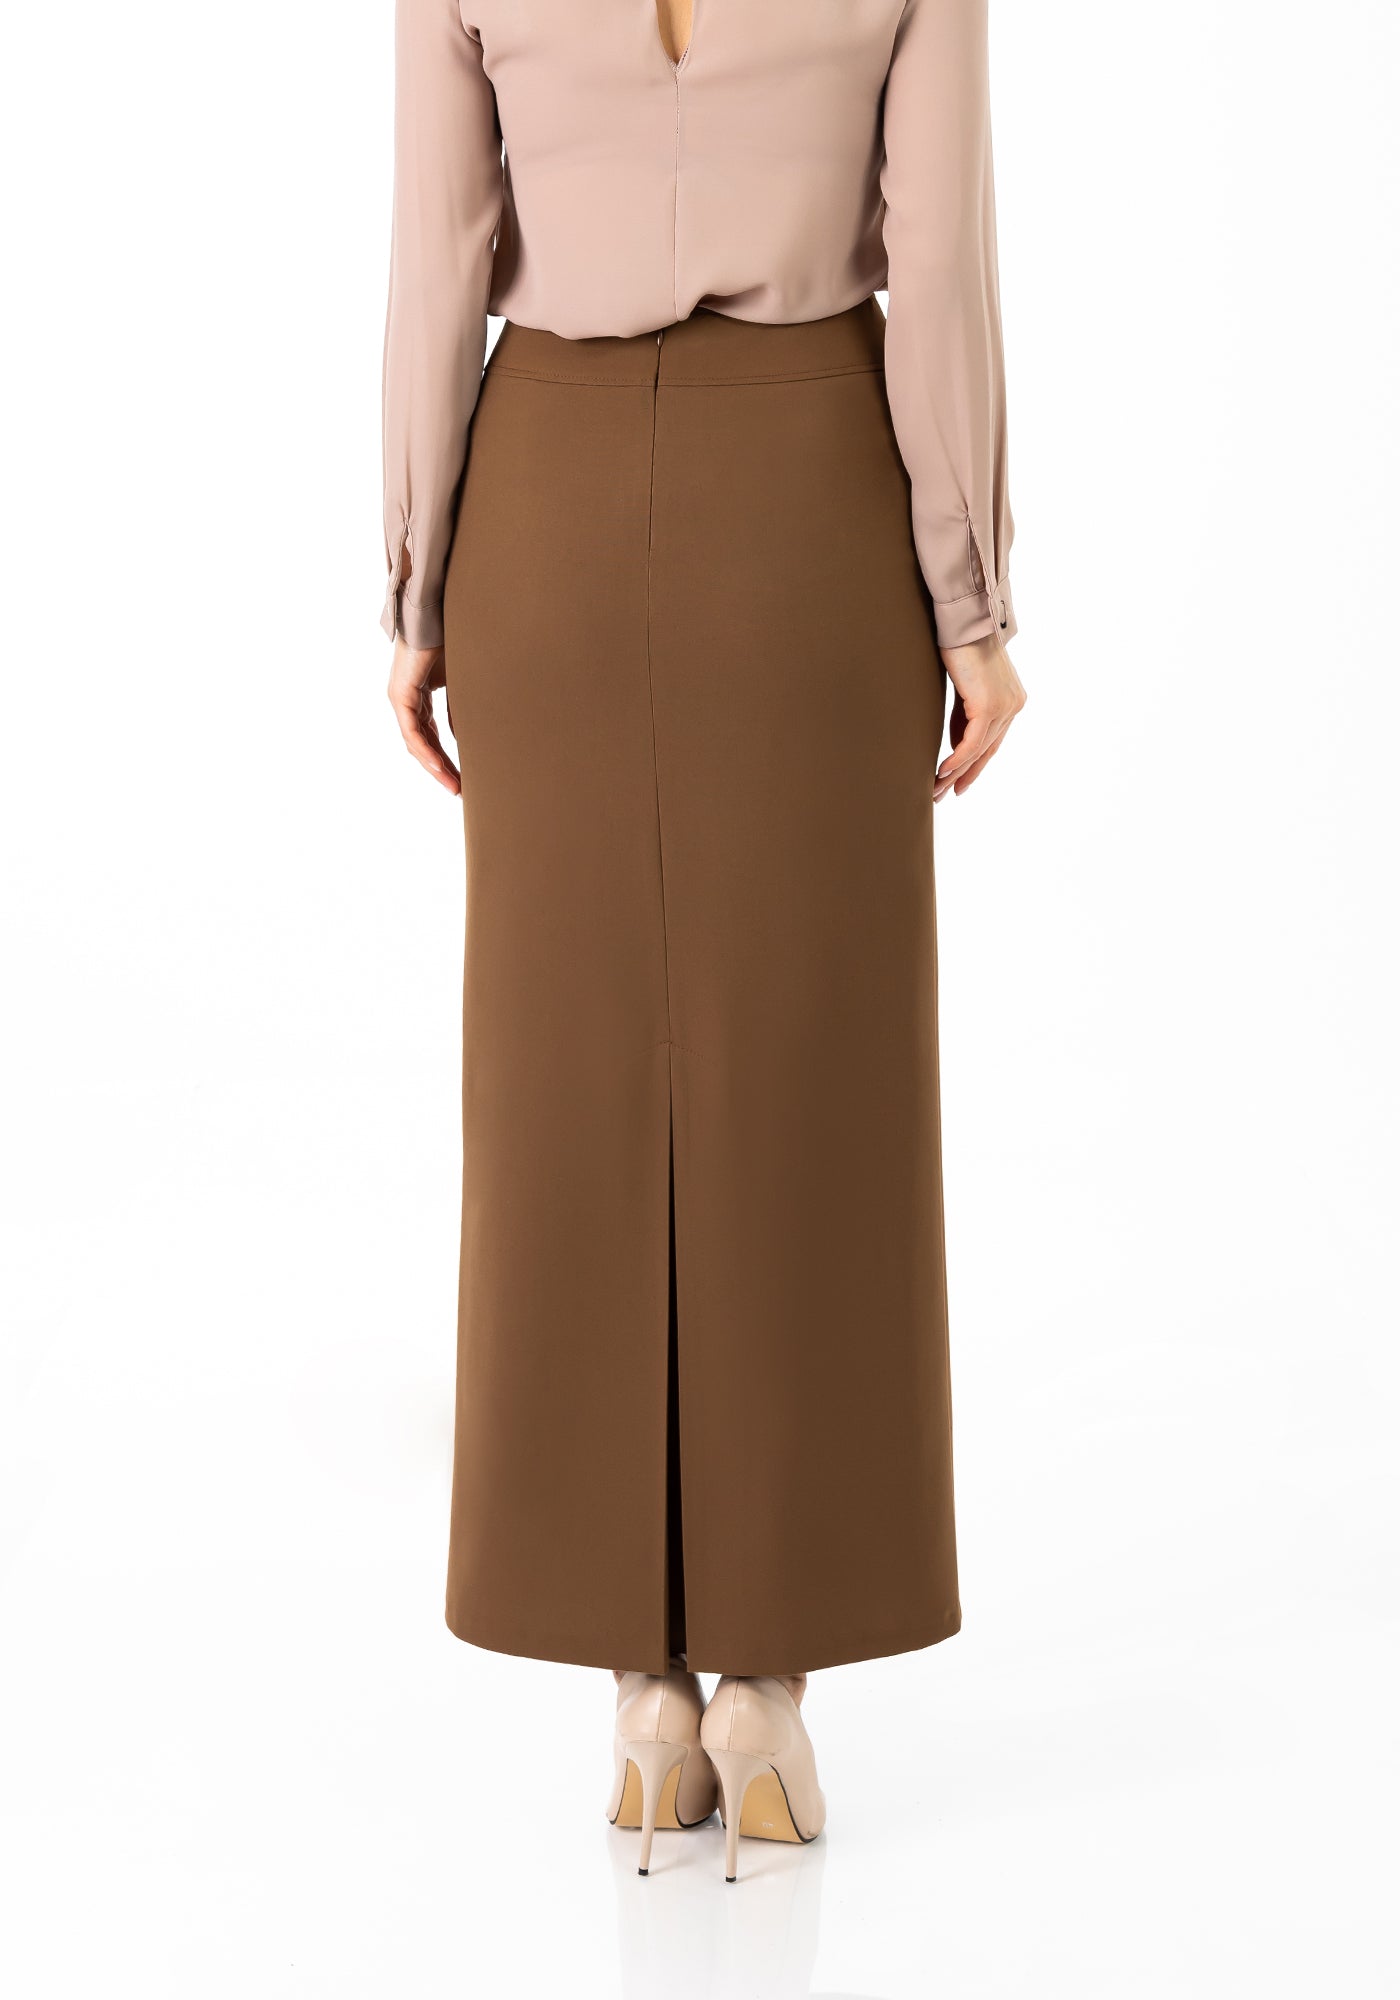 Cupric Maxi Back Slitted Pencil Skirt G-Line